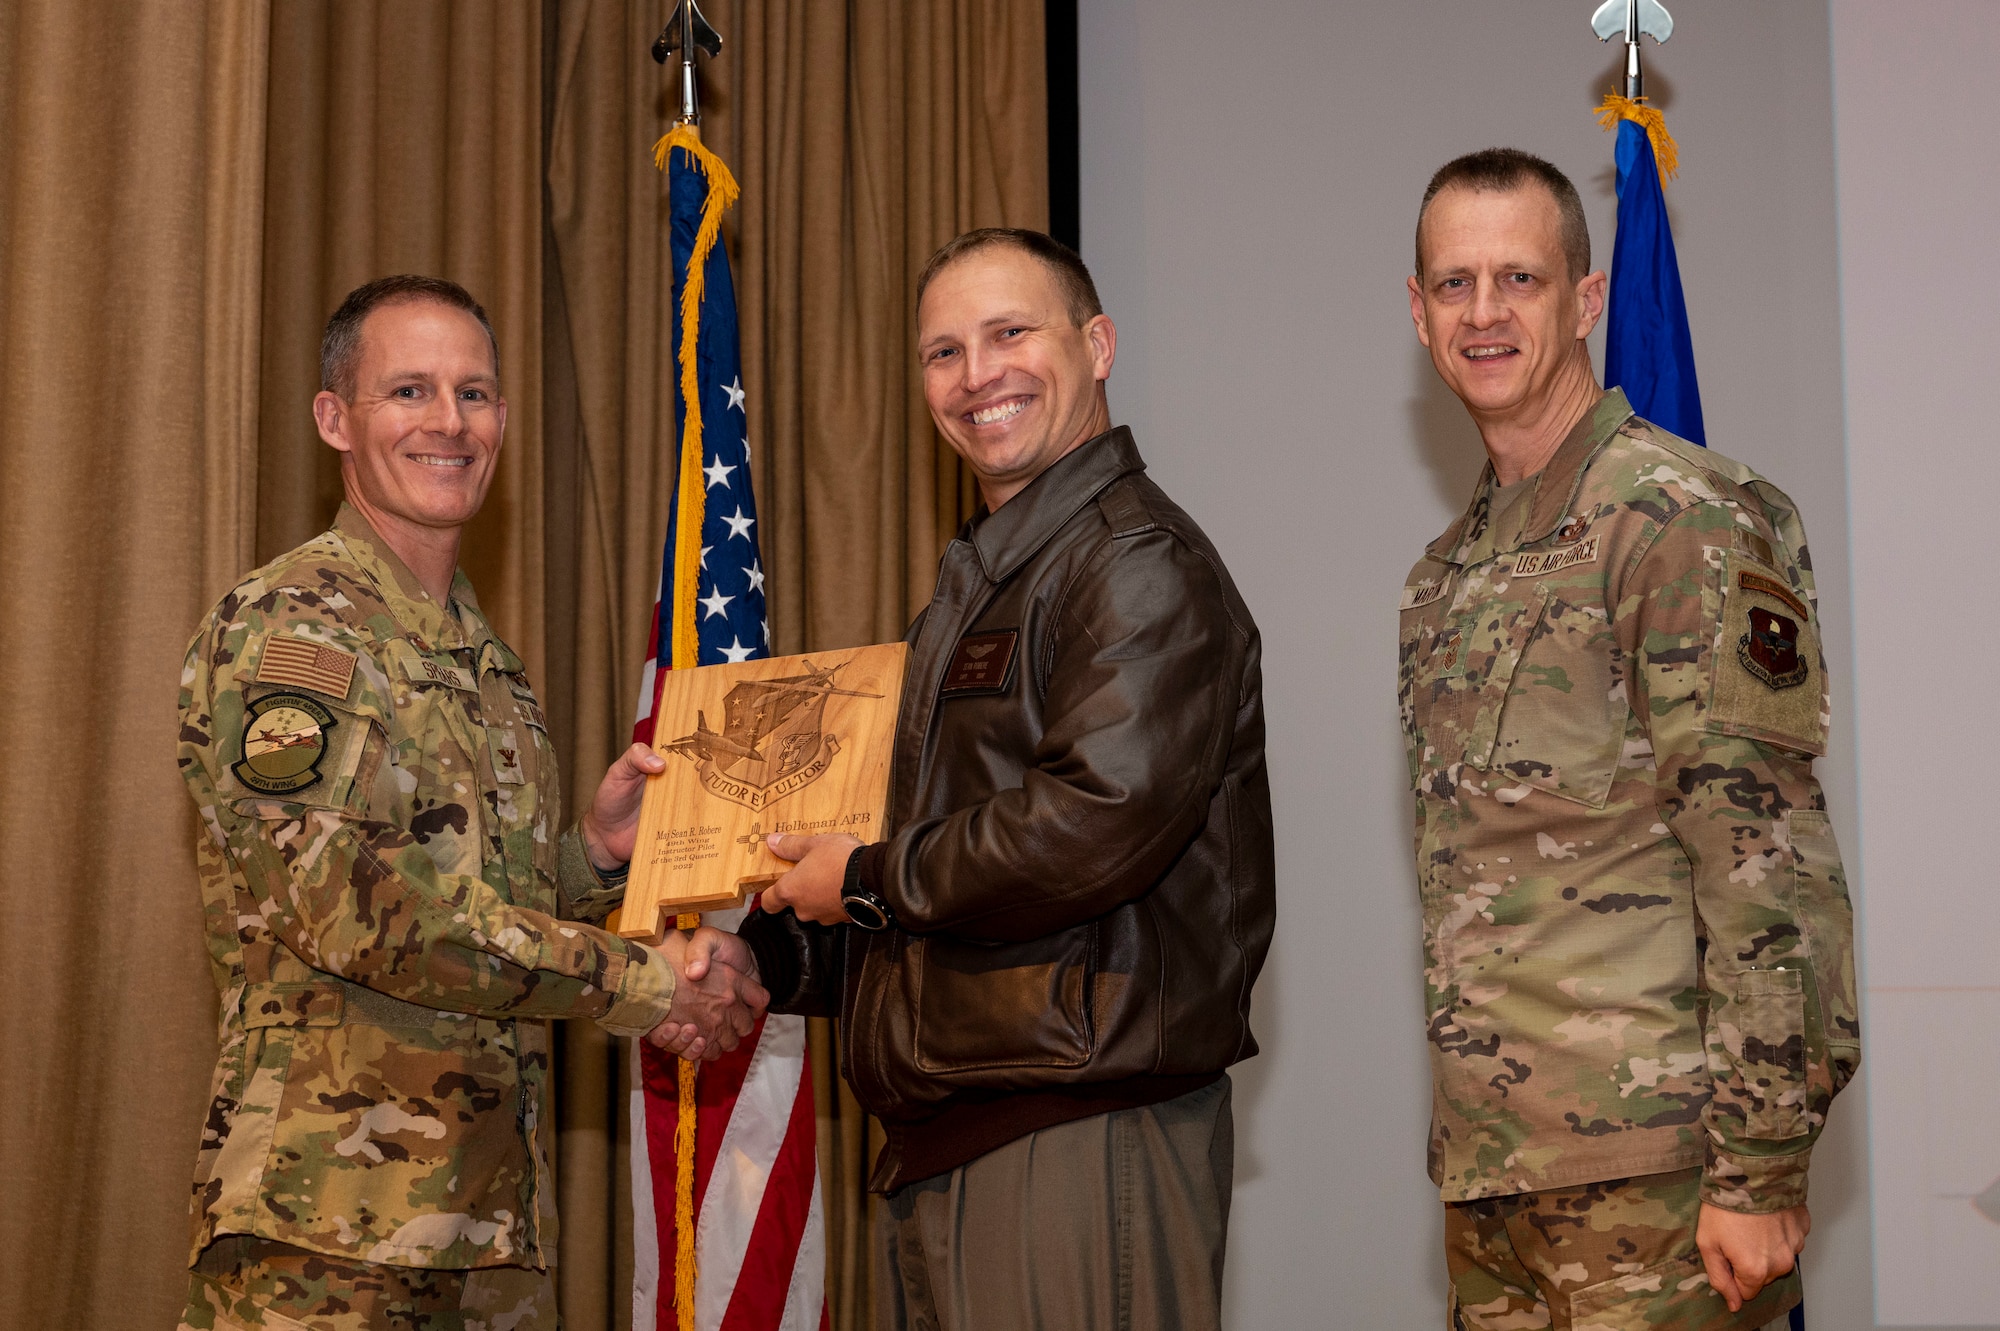 U.S. Air Force Maj. Sean Robere, from the 311th Fighter Squadron, accepts the Instructor Pilot of the Quarter Award, during the 49th Wing’s 3rd Quarter Award ceremony at Holloman Air Force Base, New Mexico, Nov. 21, 2022.